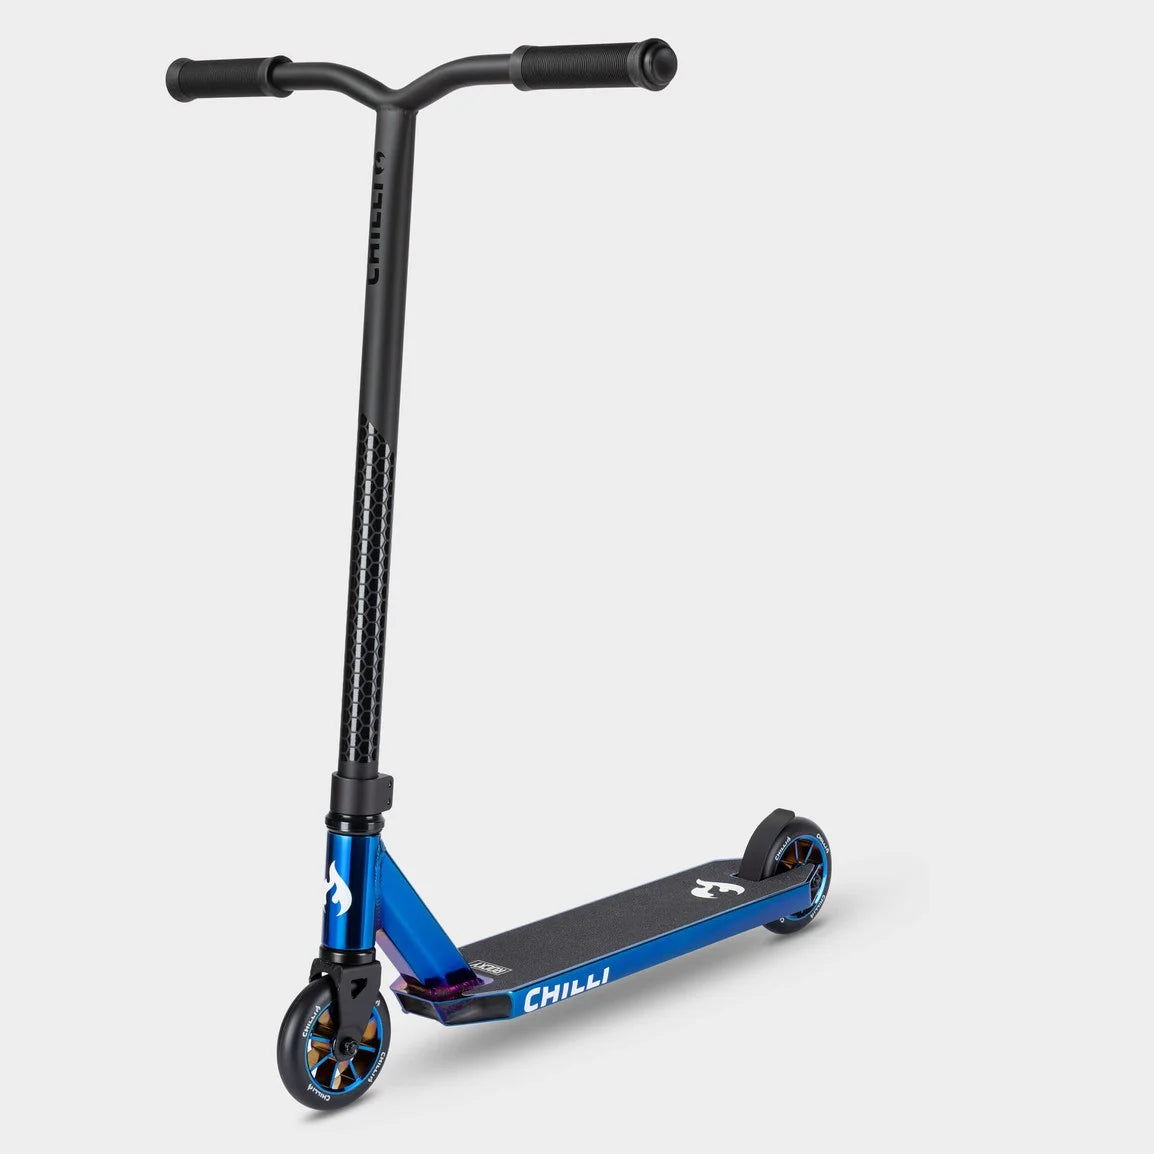 Chilli Stunt Scooter (3 colour options)